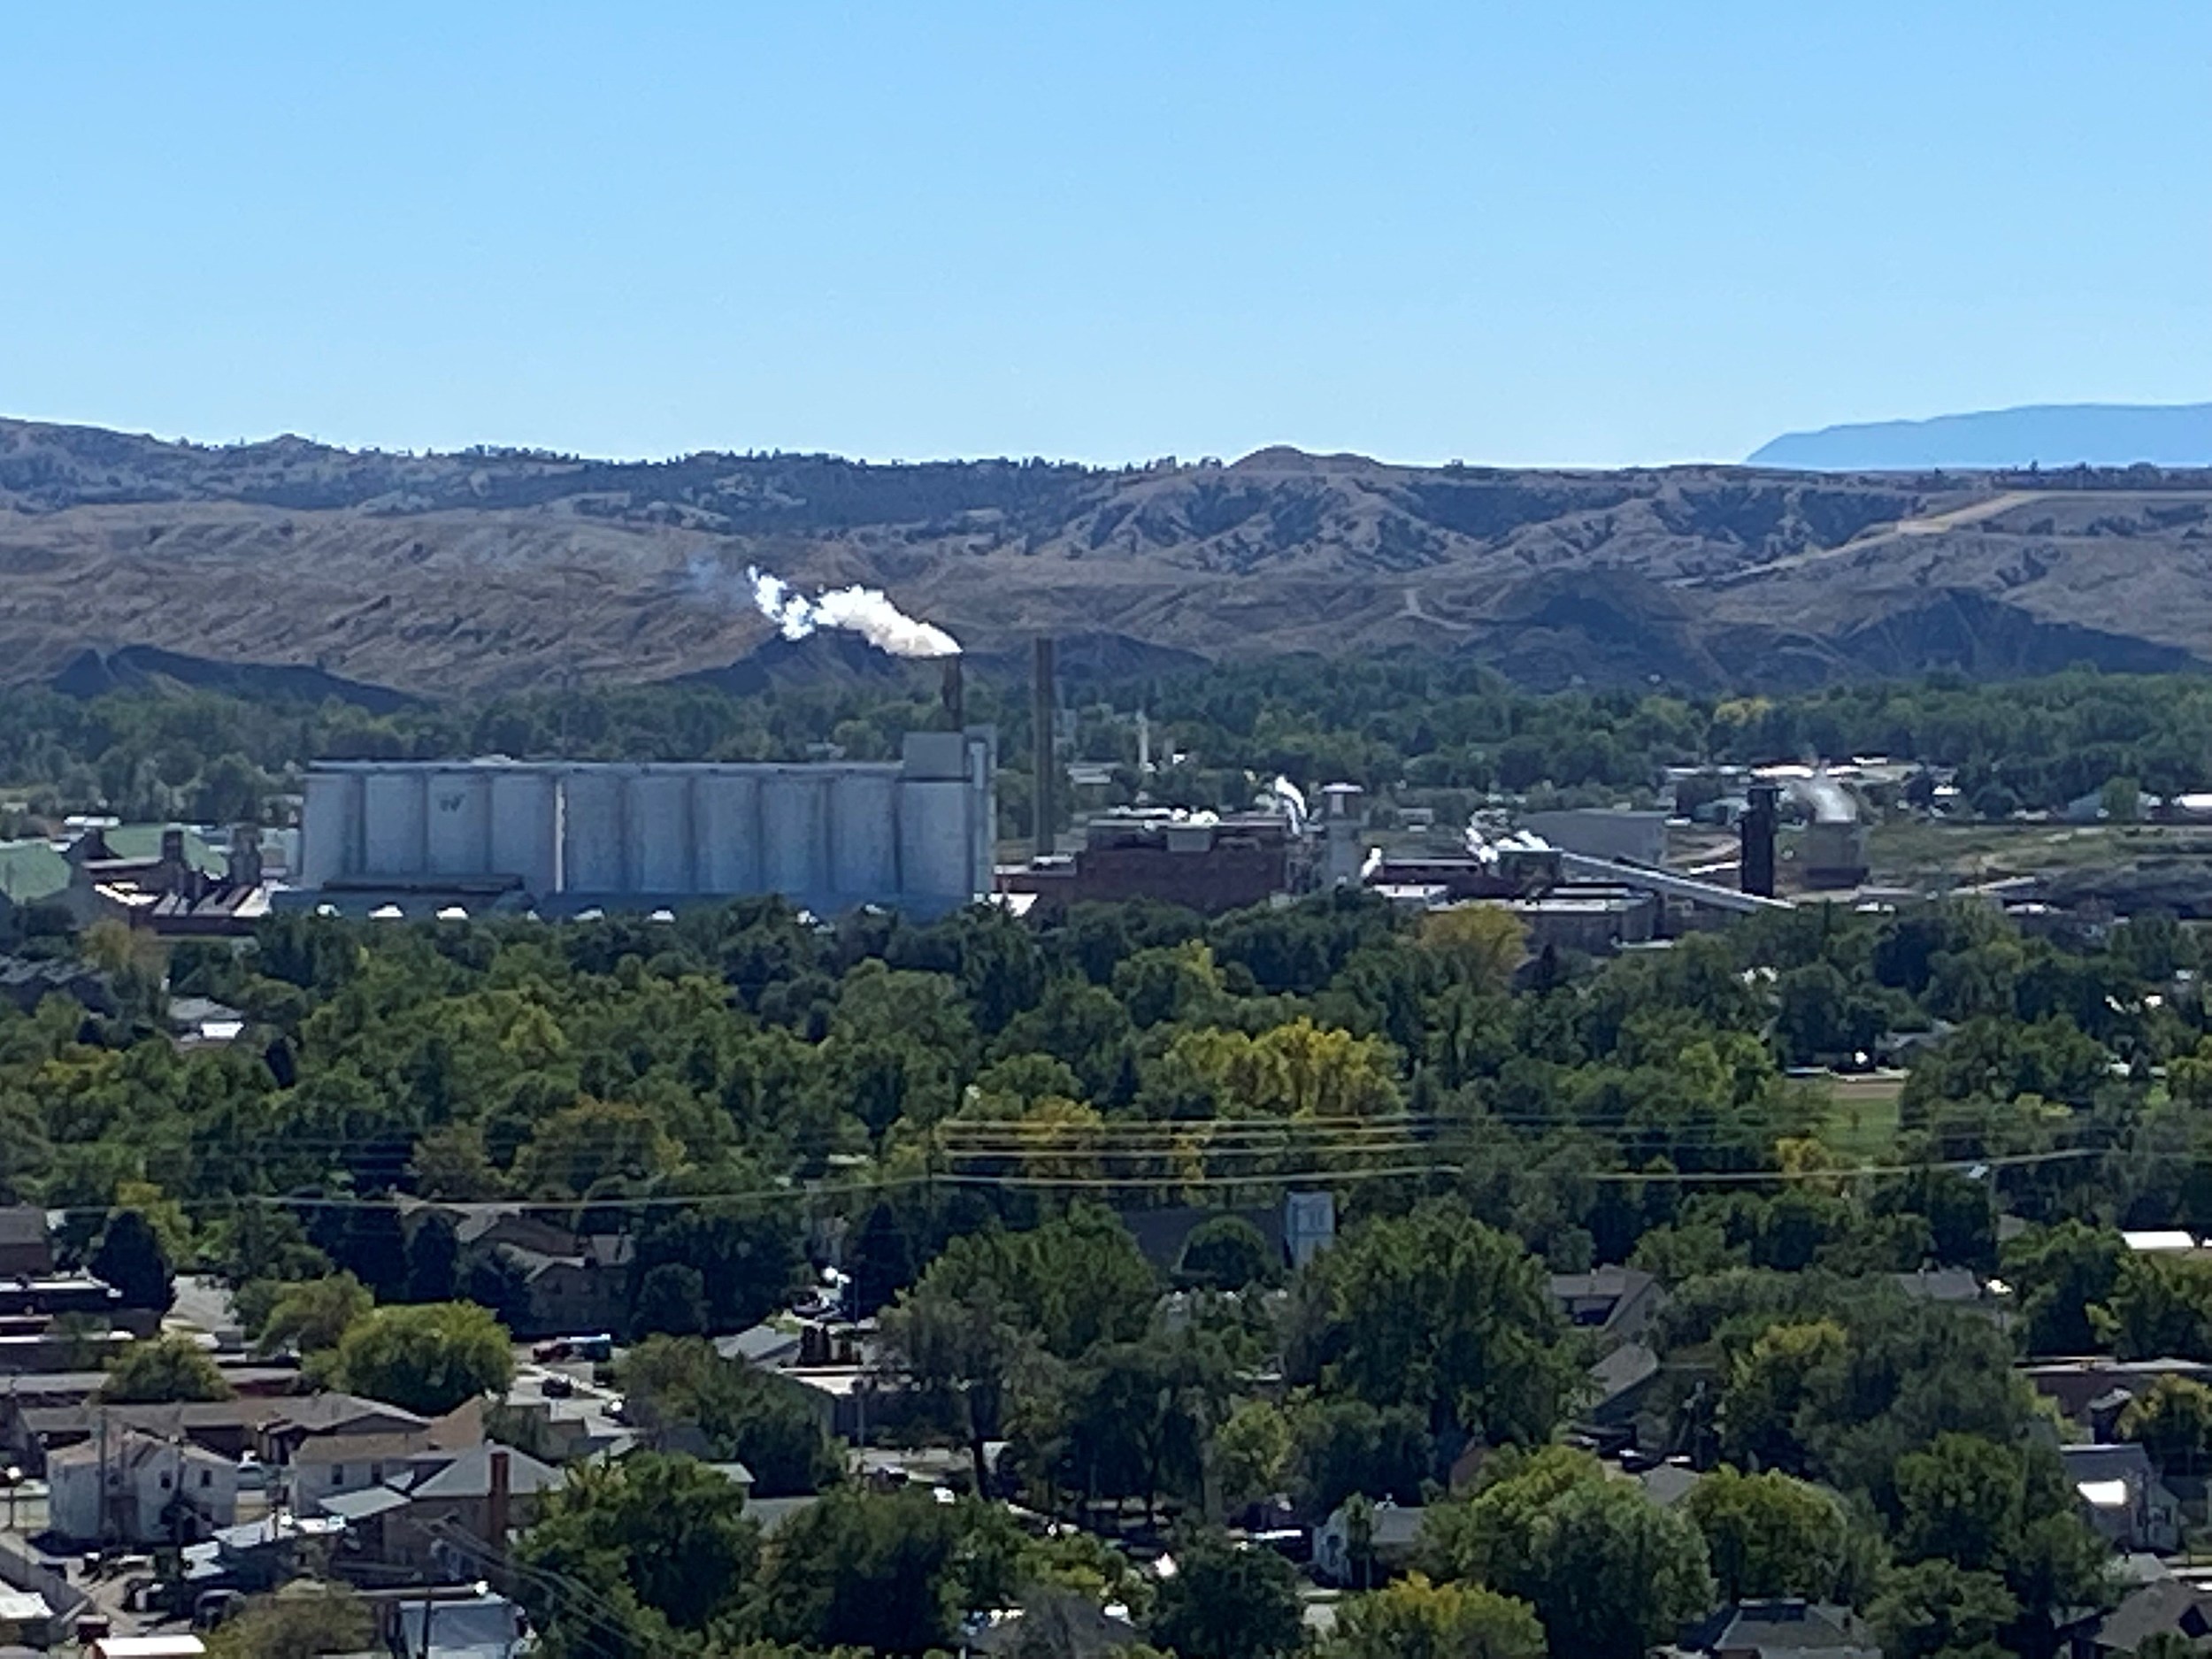 Can You Smell That? Interesting Odors In Billings, Montana